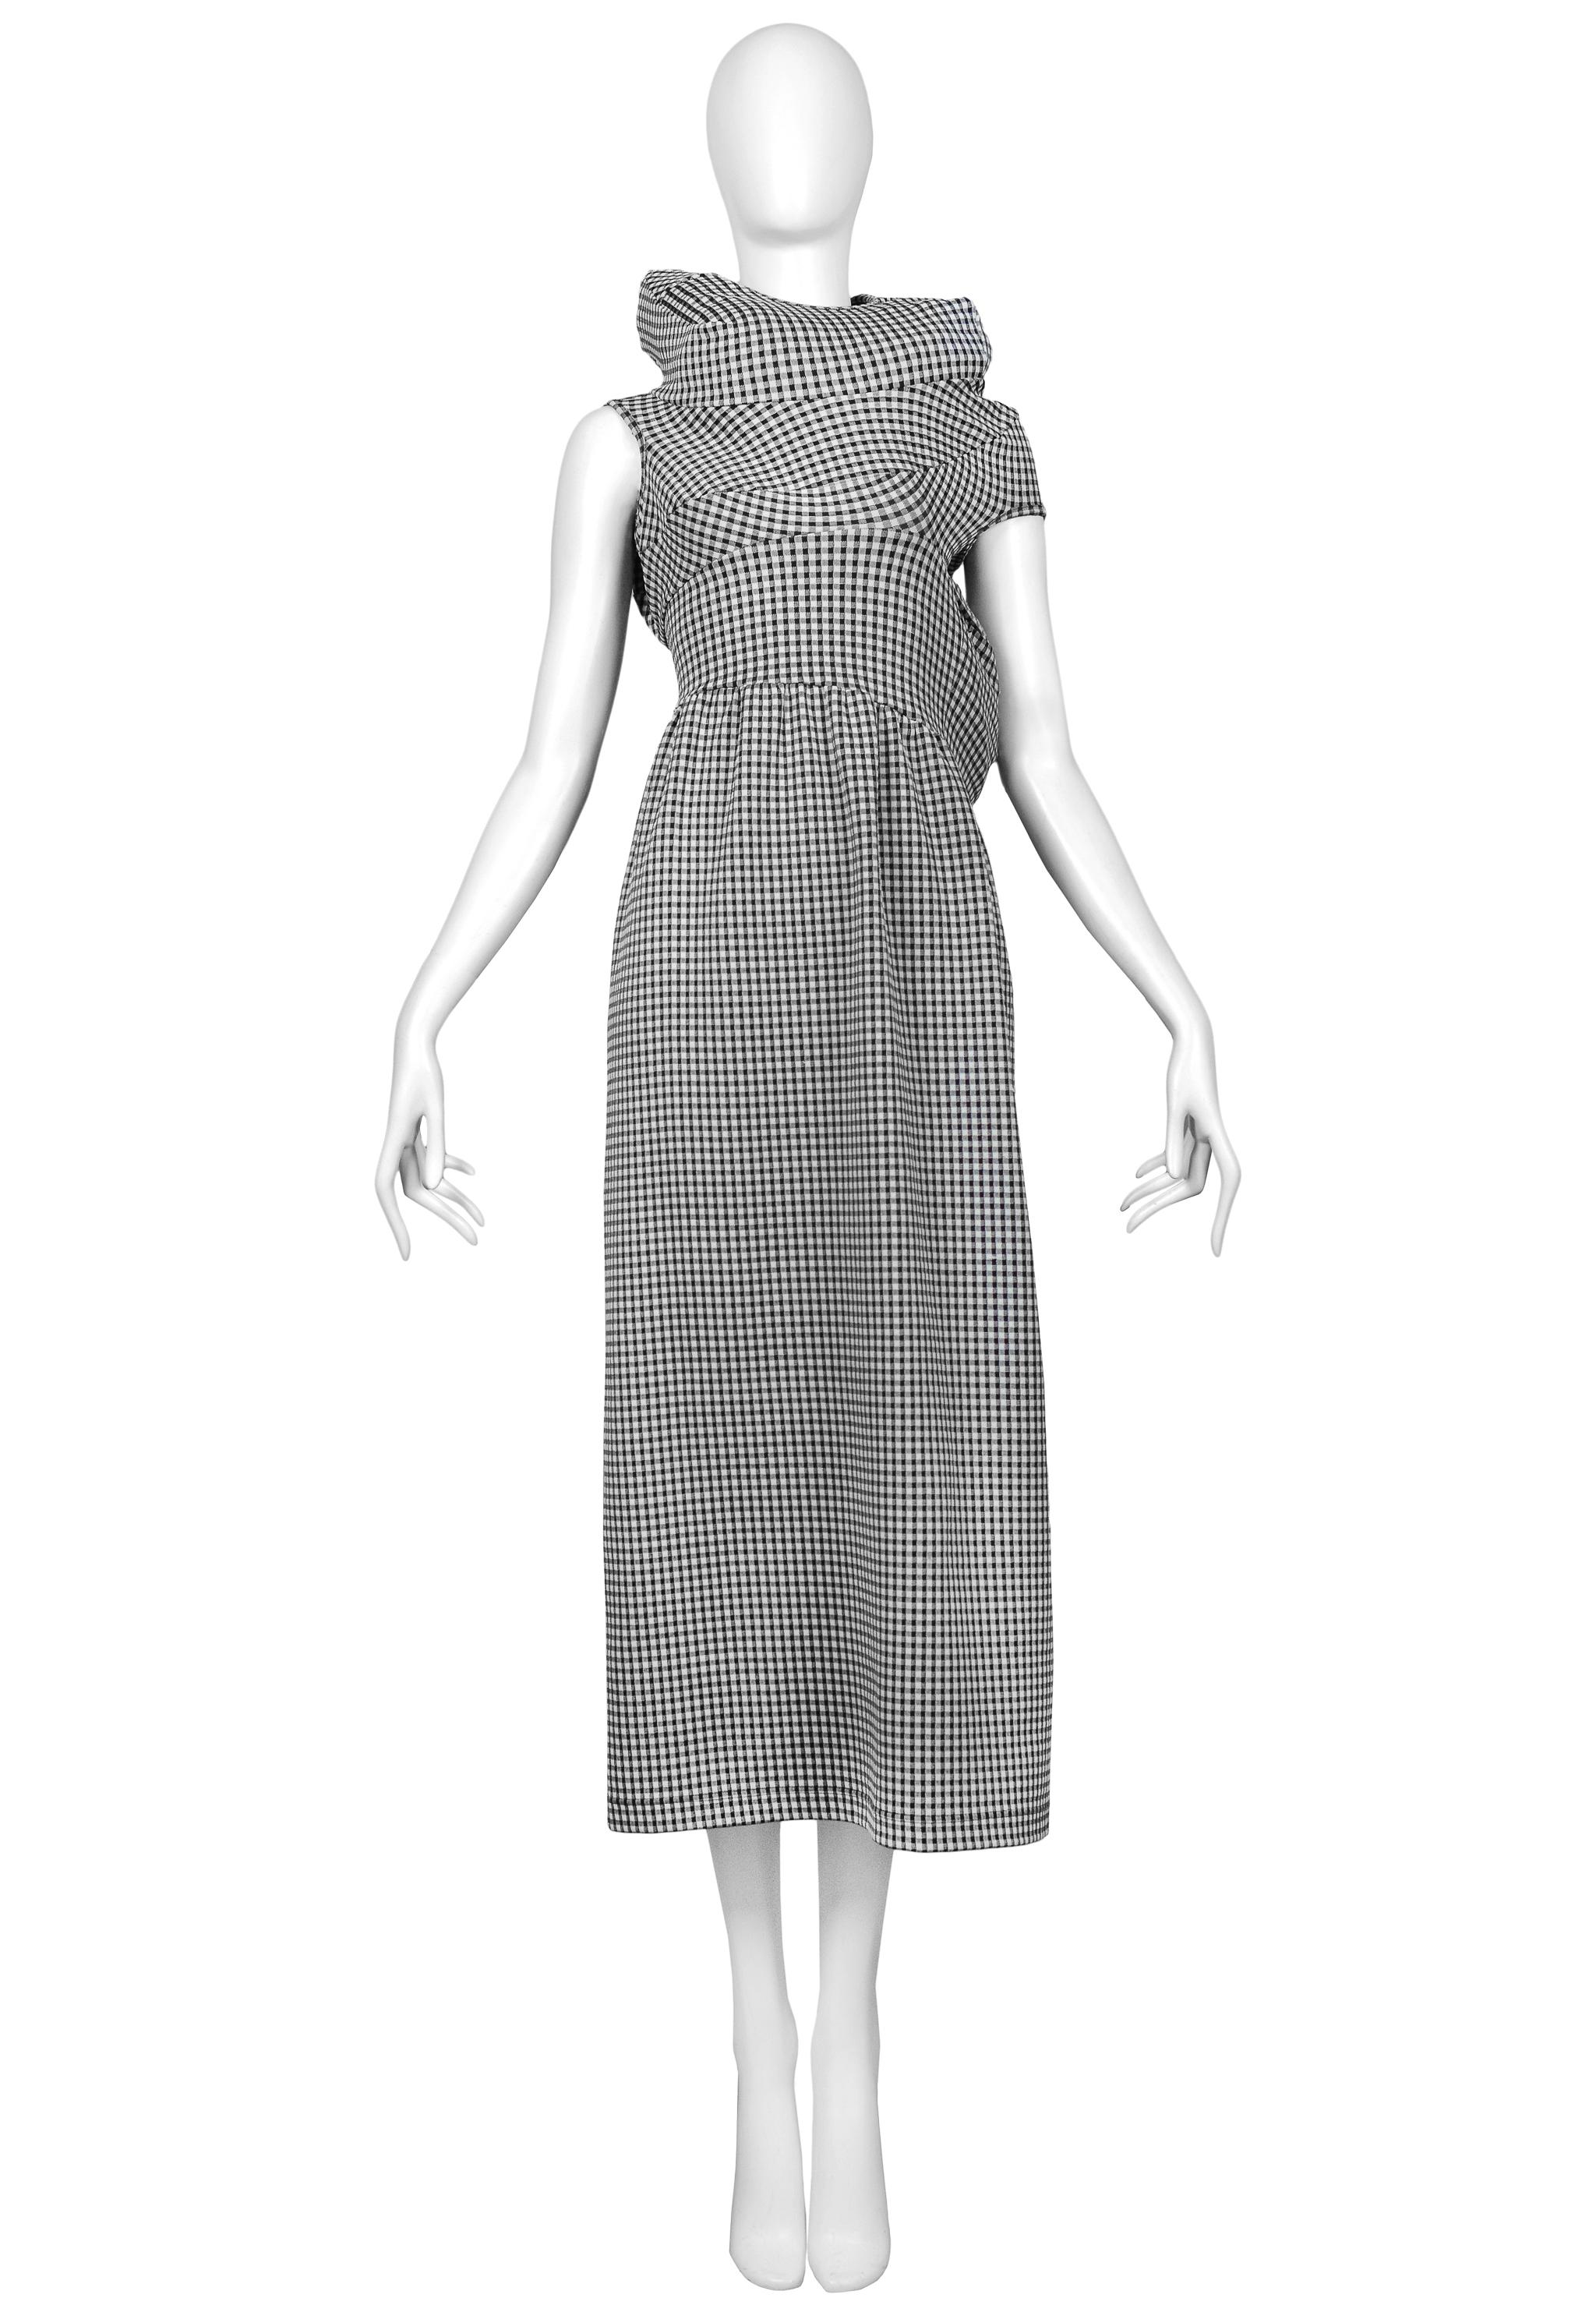 Resurrection Vintage is excited to offer a vintage Comme des Garcons rare and iconic black and white check 